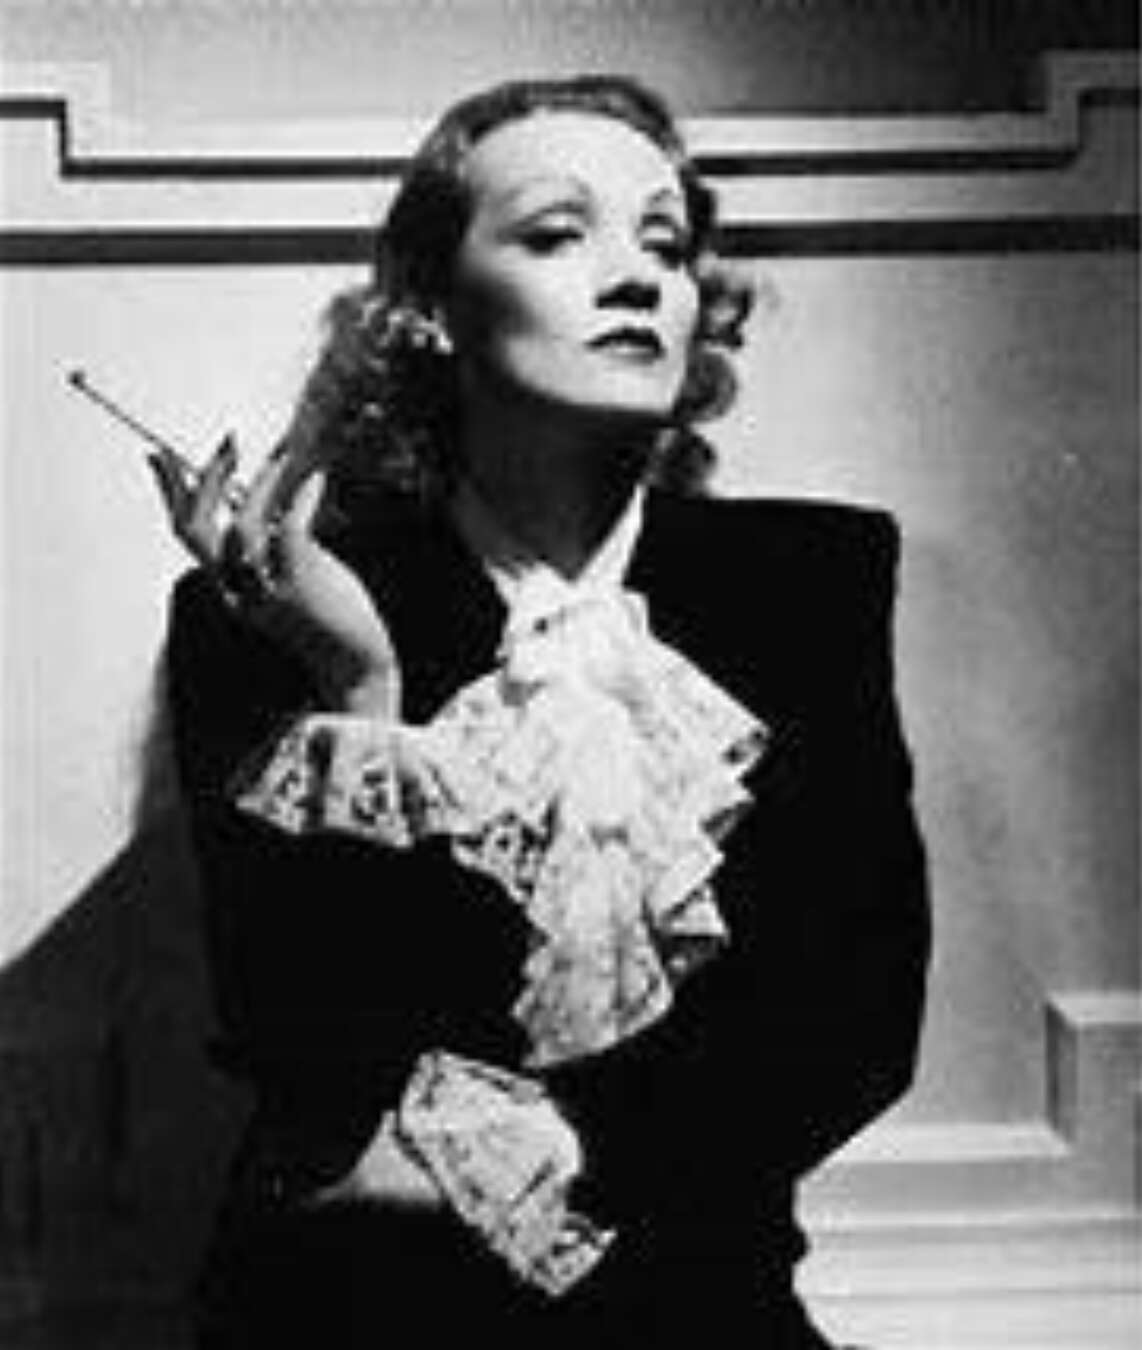 Marlene Dietrich: The Life and Work of An Ageless Visionary